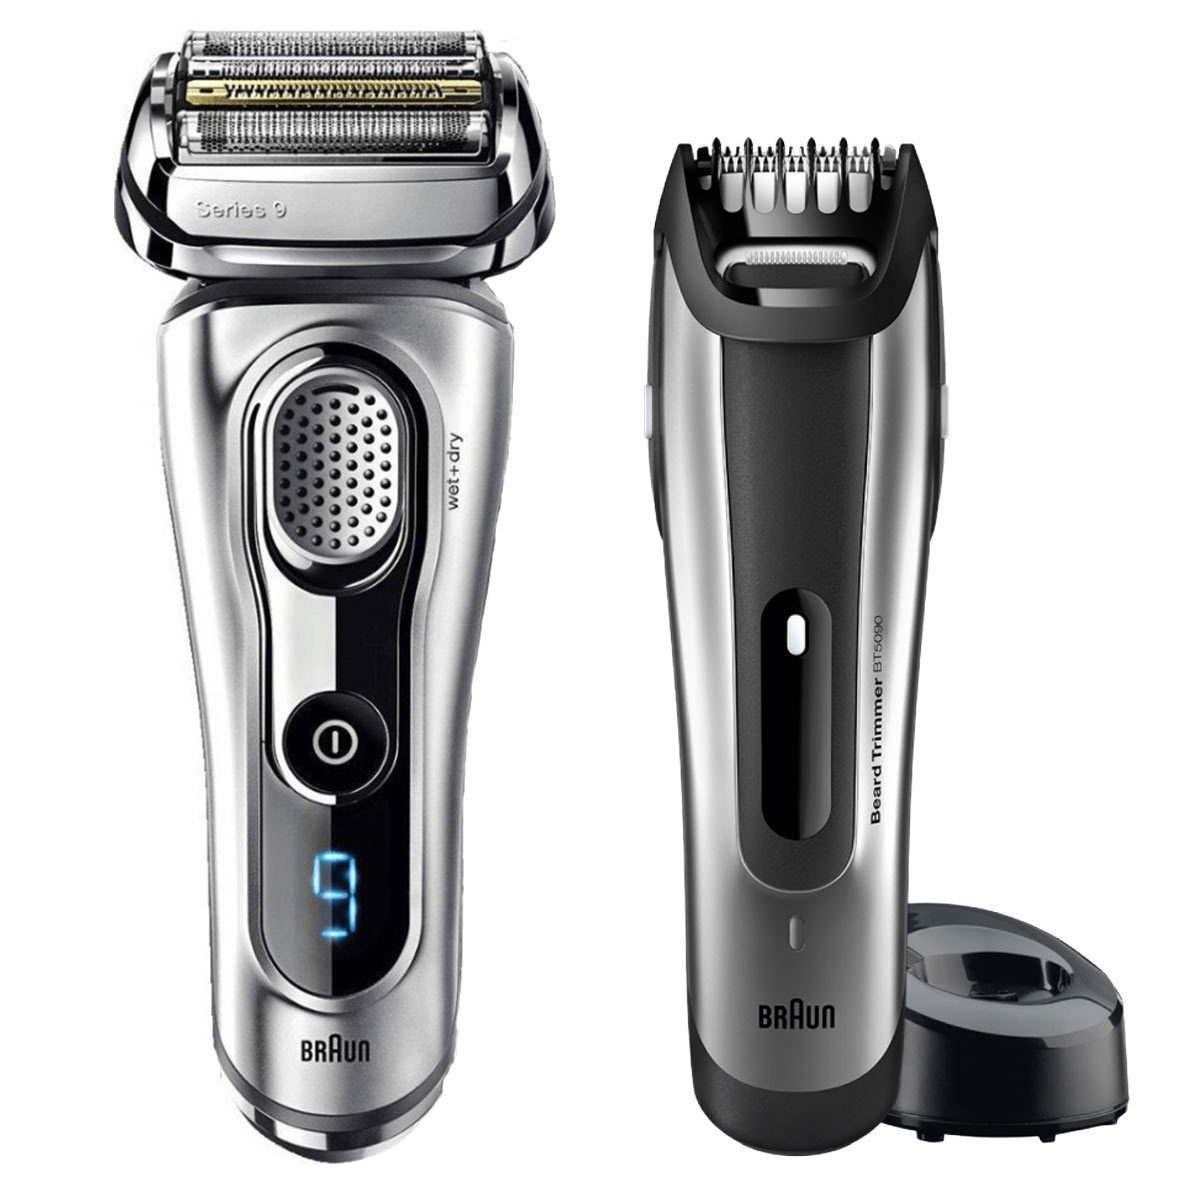 Braun Electric Razor for Men SensoFlex with Beard Trimmer?hargeable?harge?harge%WetDry Foil Shaver with 4-in-1 SmartCare Center and Travel - 1